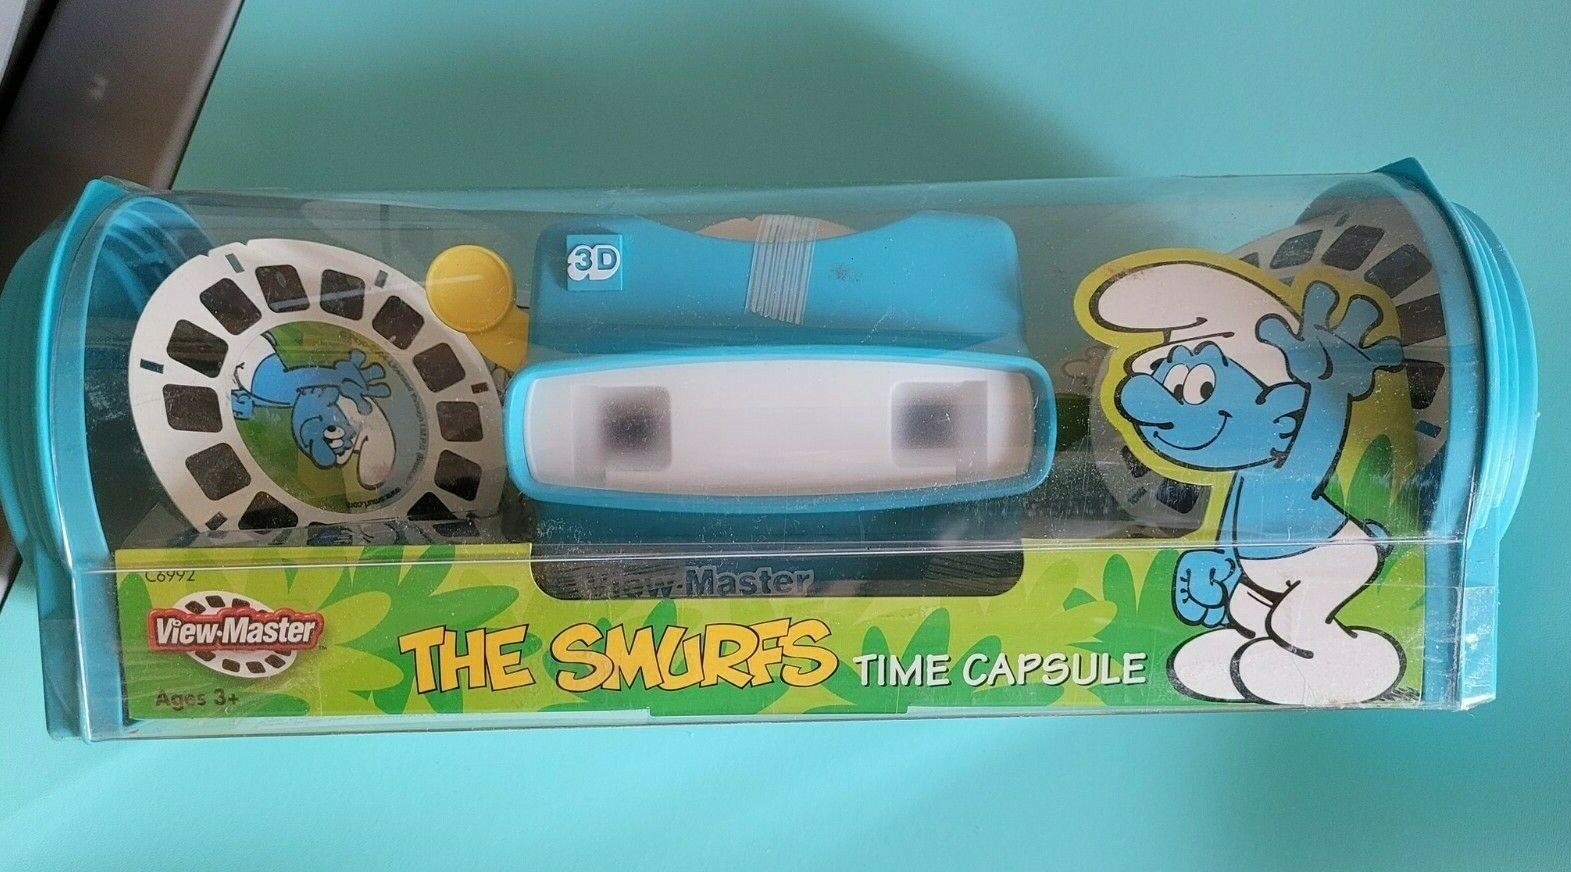 Sealed Smurfs Time Capsule Time-capsule Giftset view-master Viewer 3 Reels Boxed